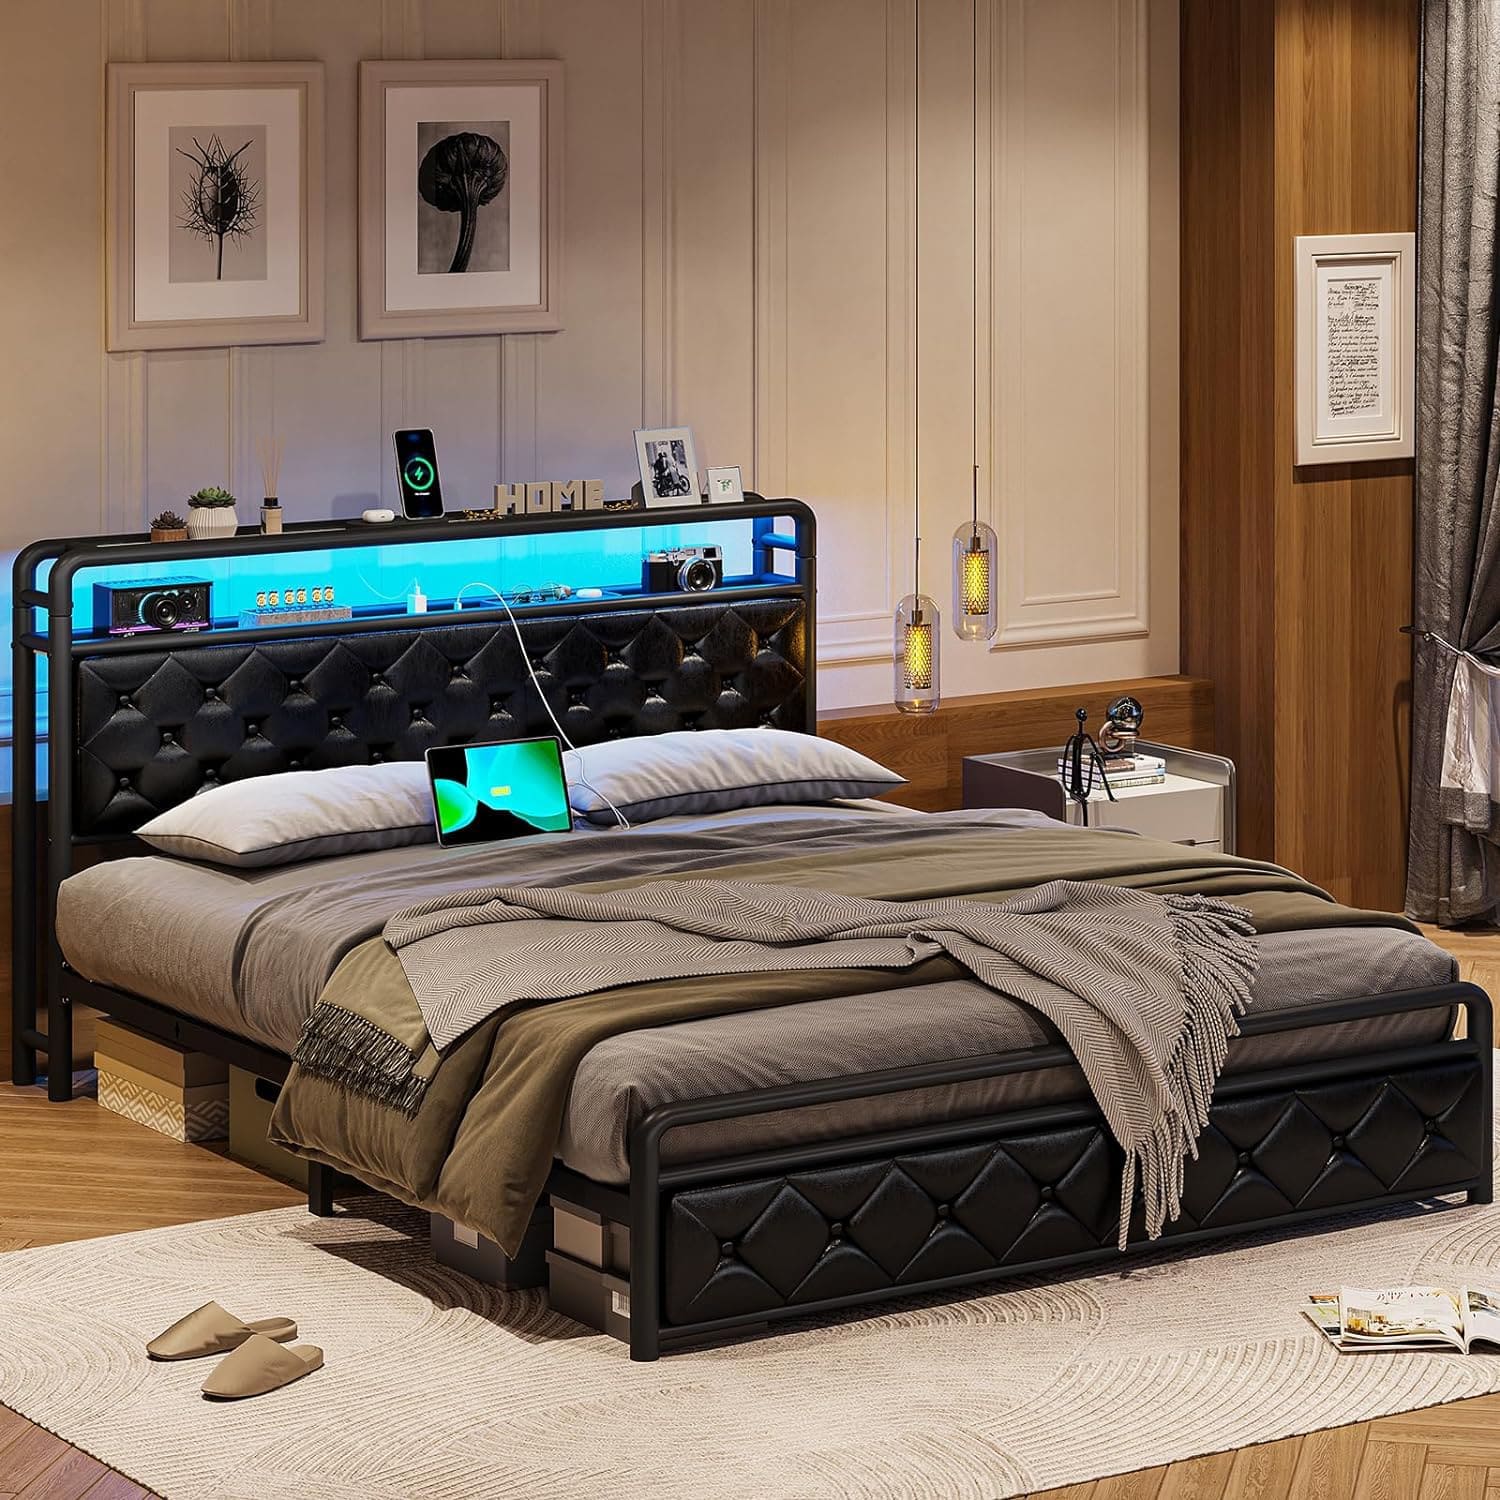 https://www.sikaic.com/cdn/shop/files/sikaic-beds-bed-frames-modern-black-king-size-faux-leather-led-bed-frame-with-power-outlets-usb-ports-storage-headboard-black-dj502936-1-43279318155572.jpg?v=1712802888